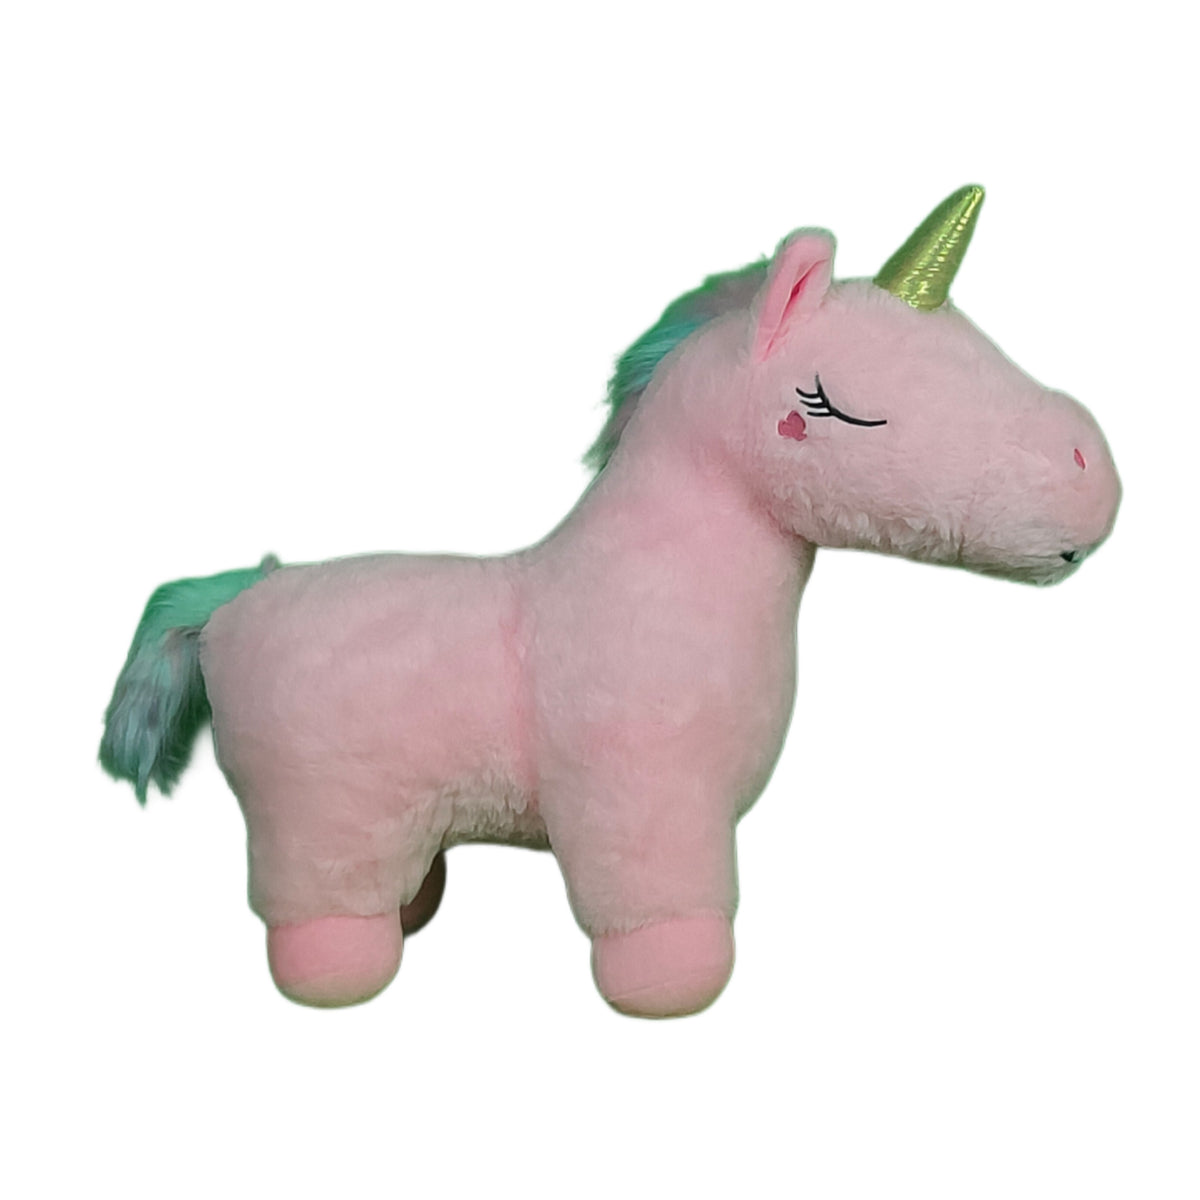 Play Hour Miss Unicorn Plush Soft Toy for Ages 3 Years and Up - Pink, 45cm